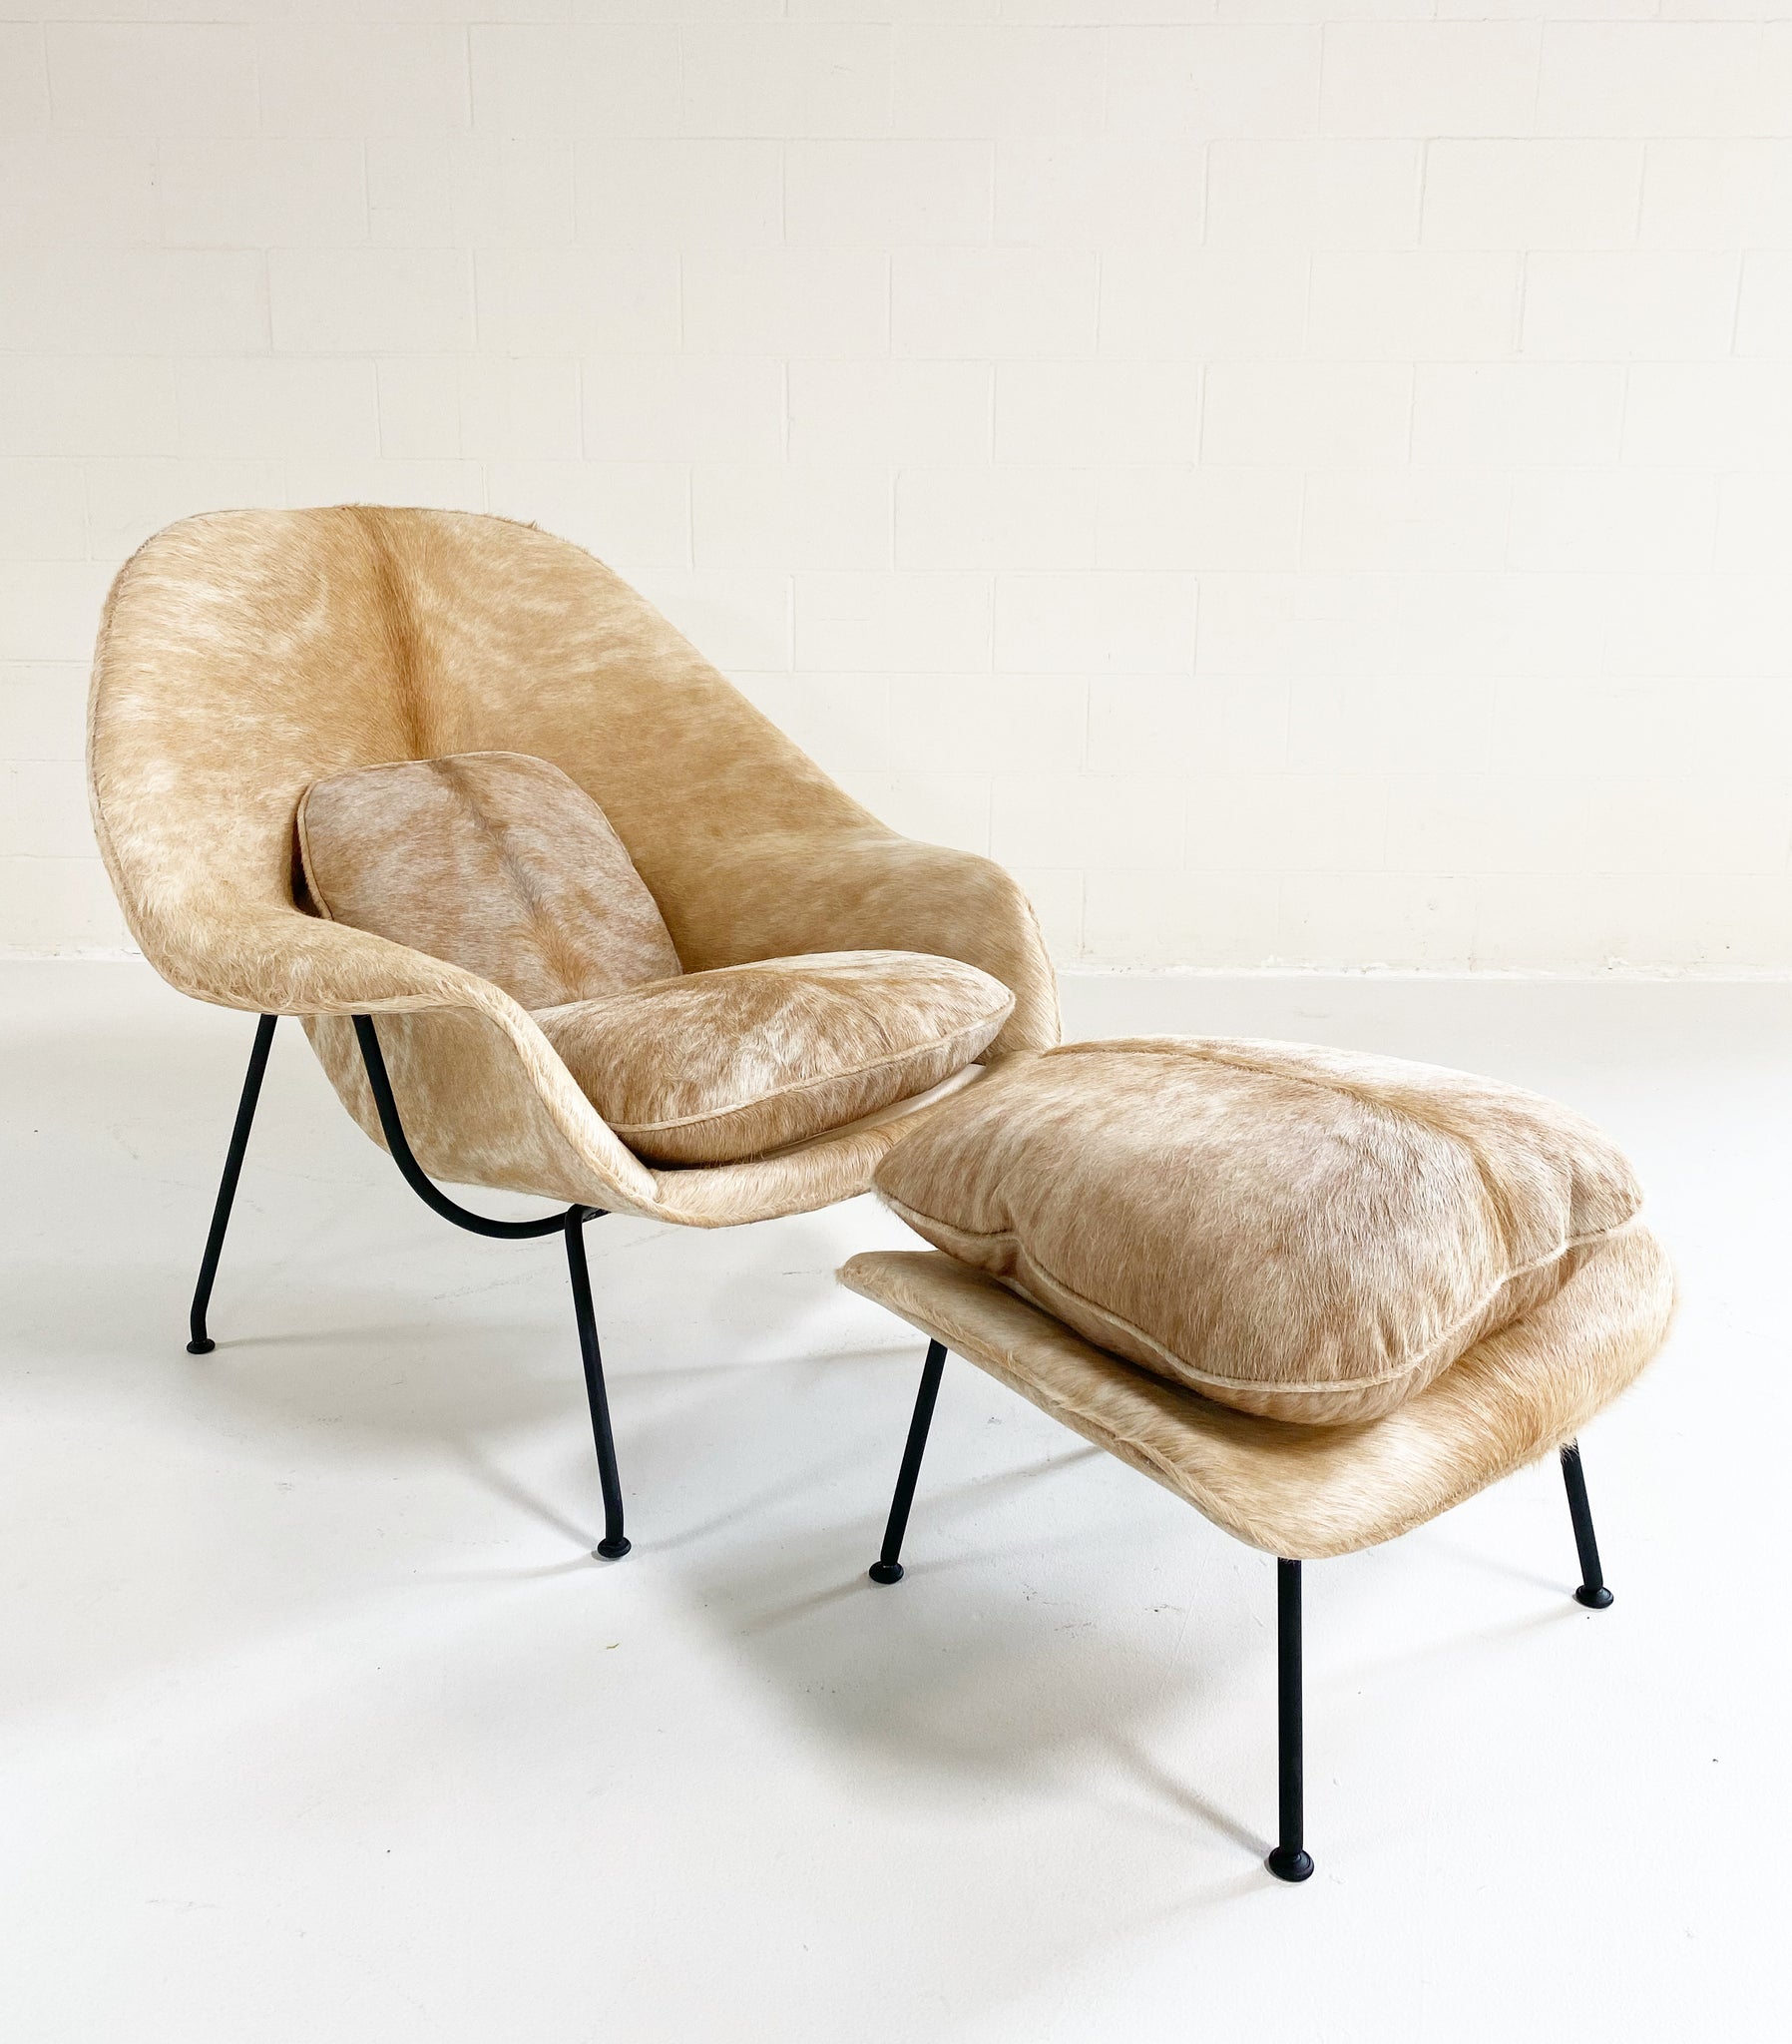 One-of-a-Kind Womb Chair and Ottoman in Brazilian Cowhide